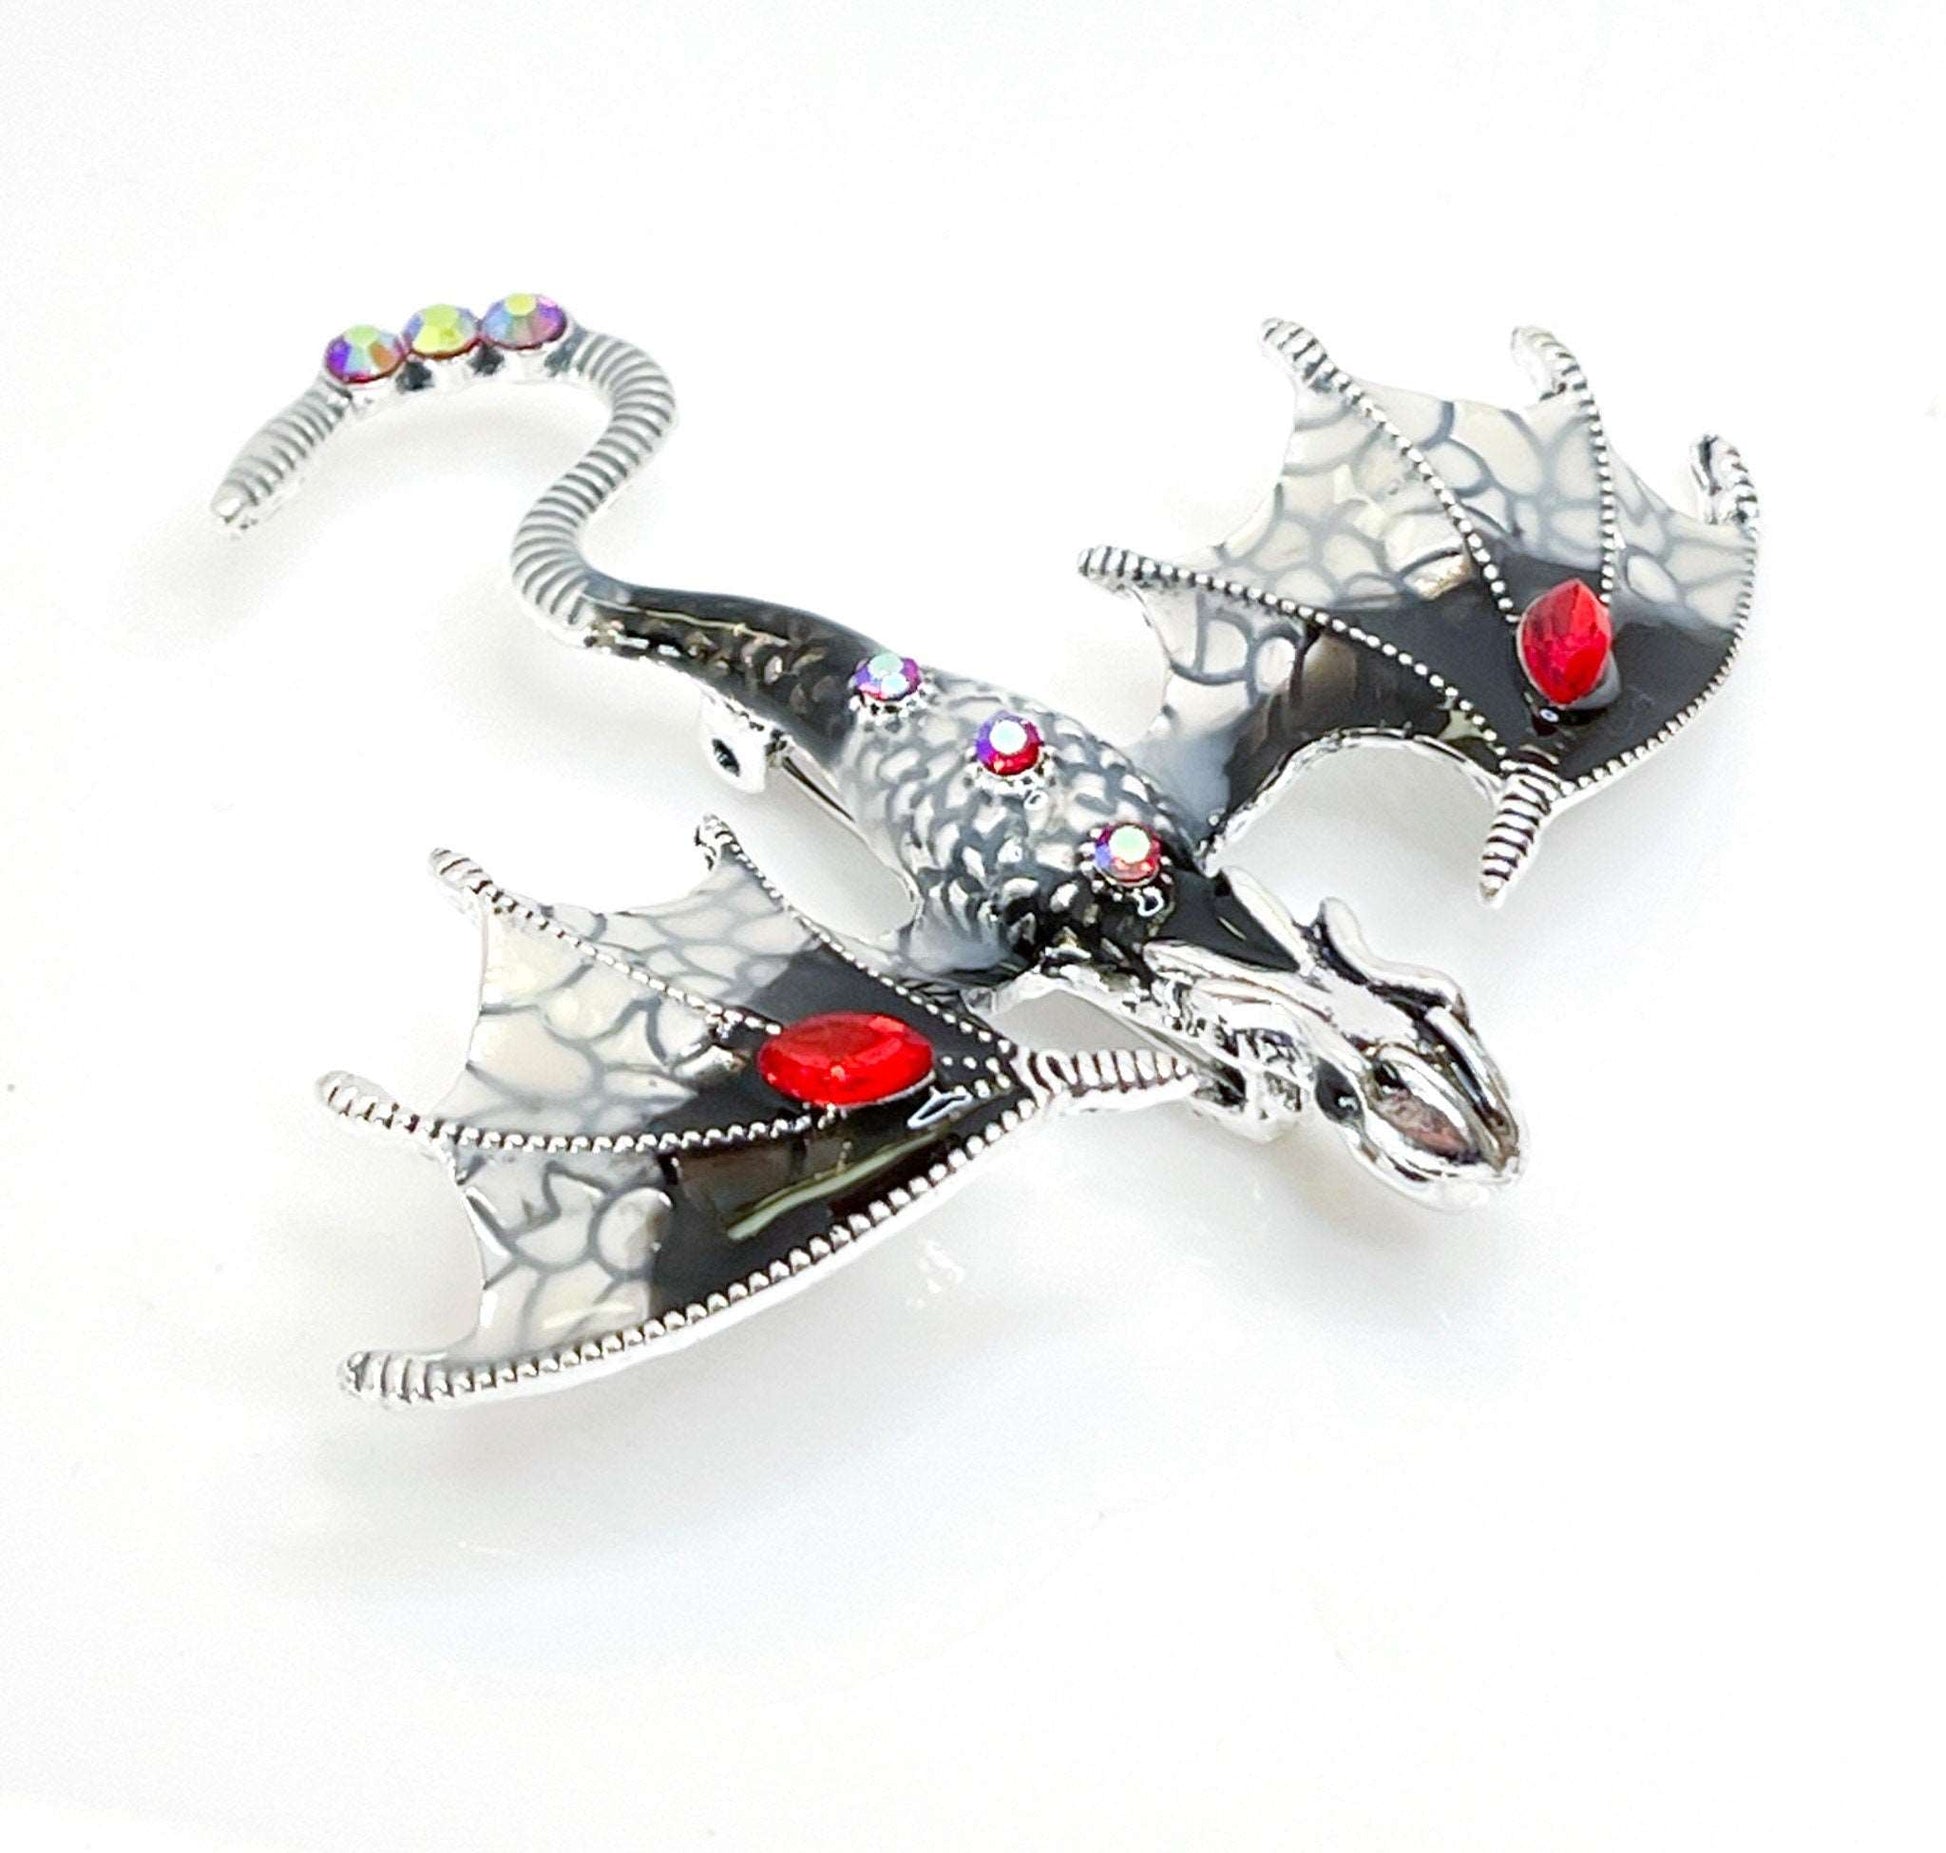 Large Black Red Flying Dragon Brooch with Crystals | Gothic Fashion Brooch